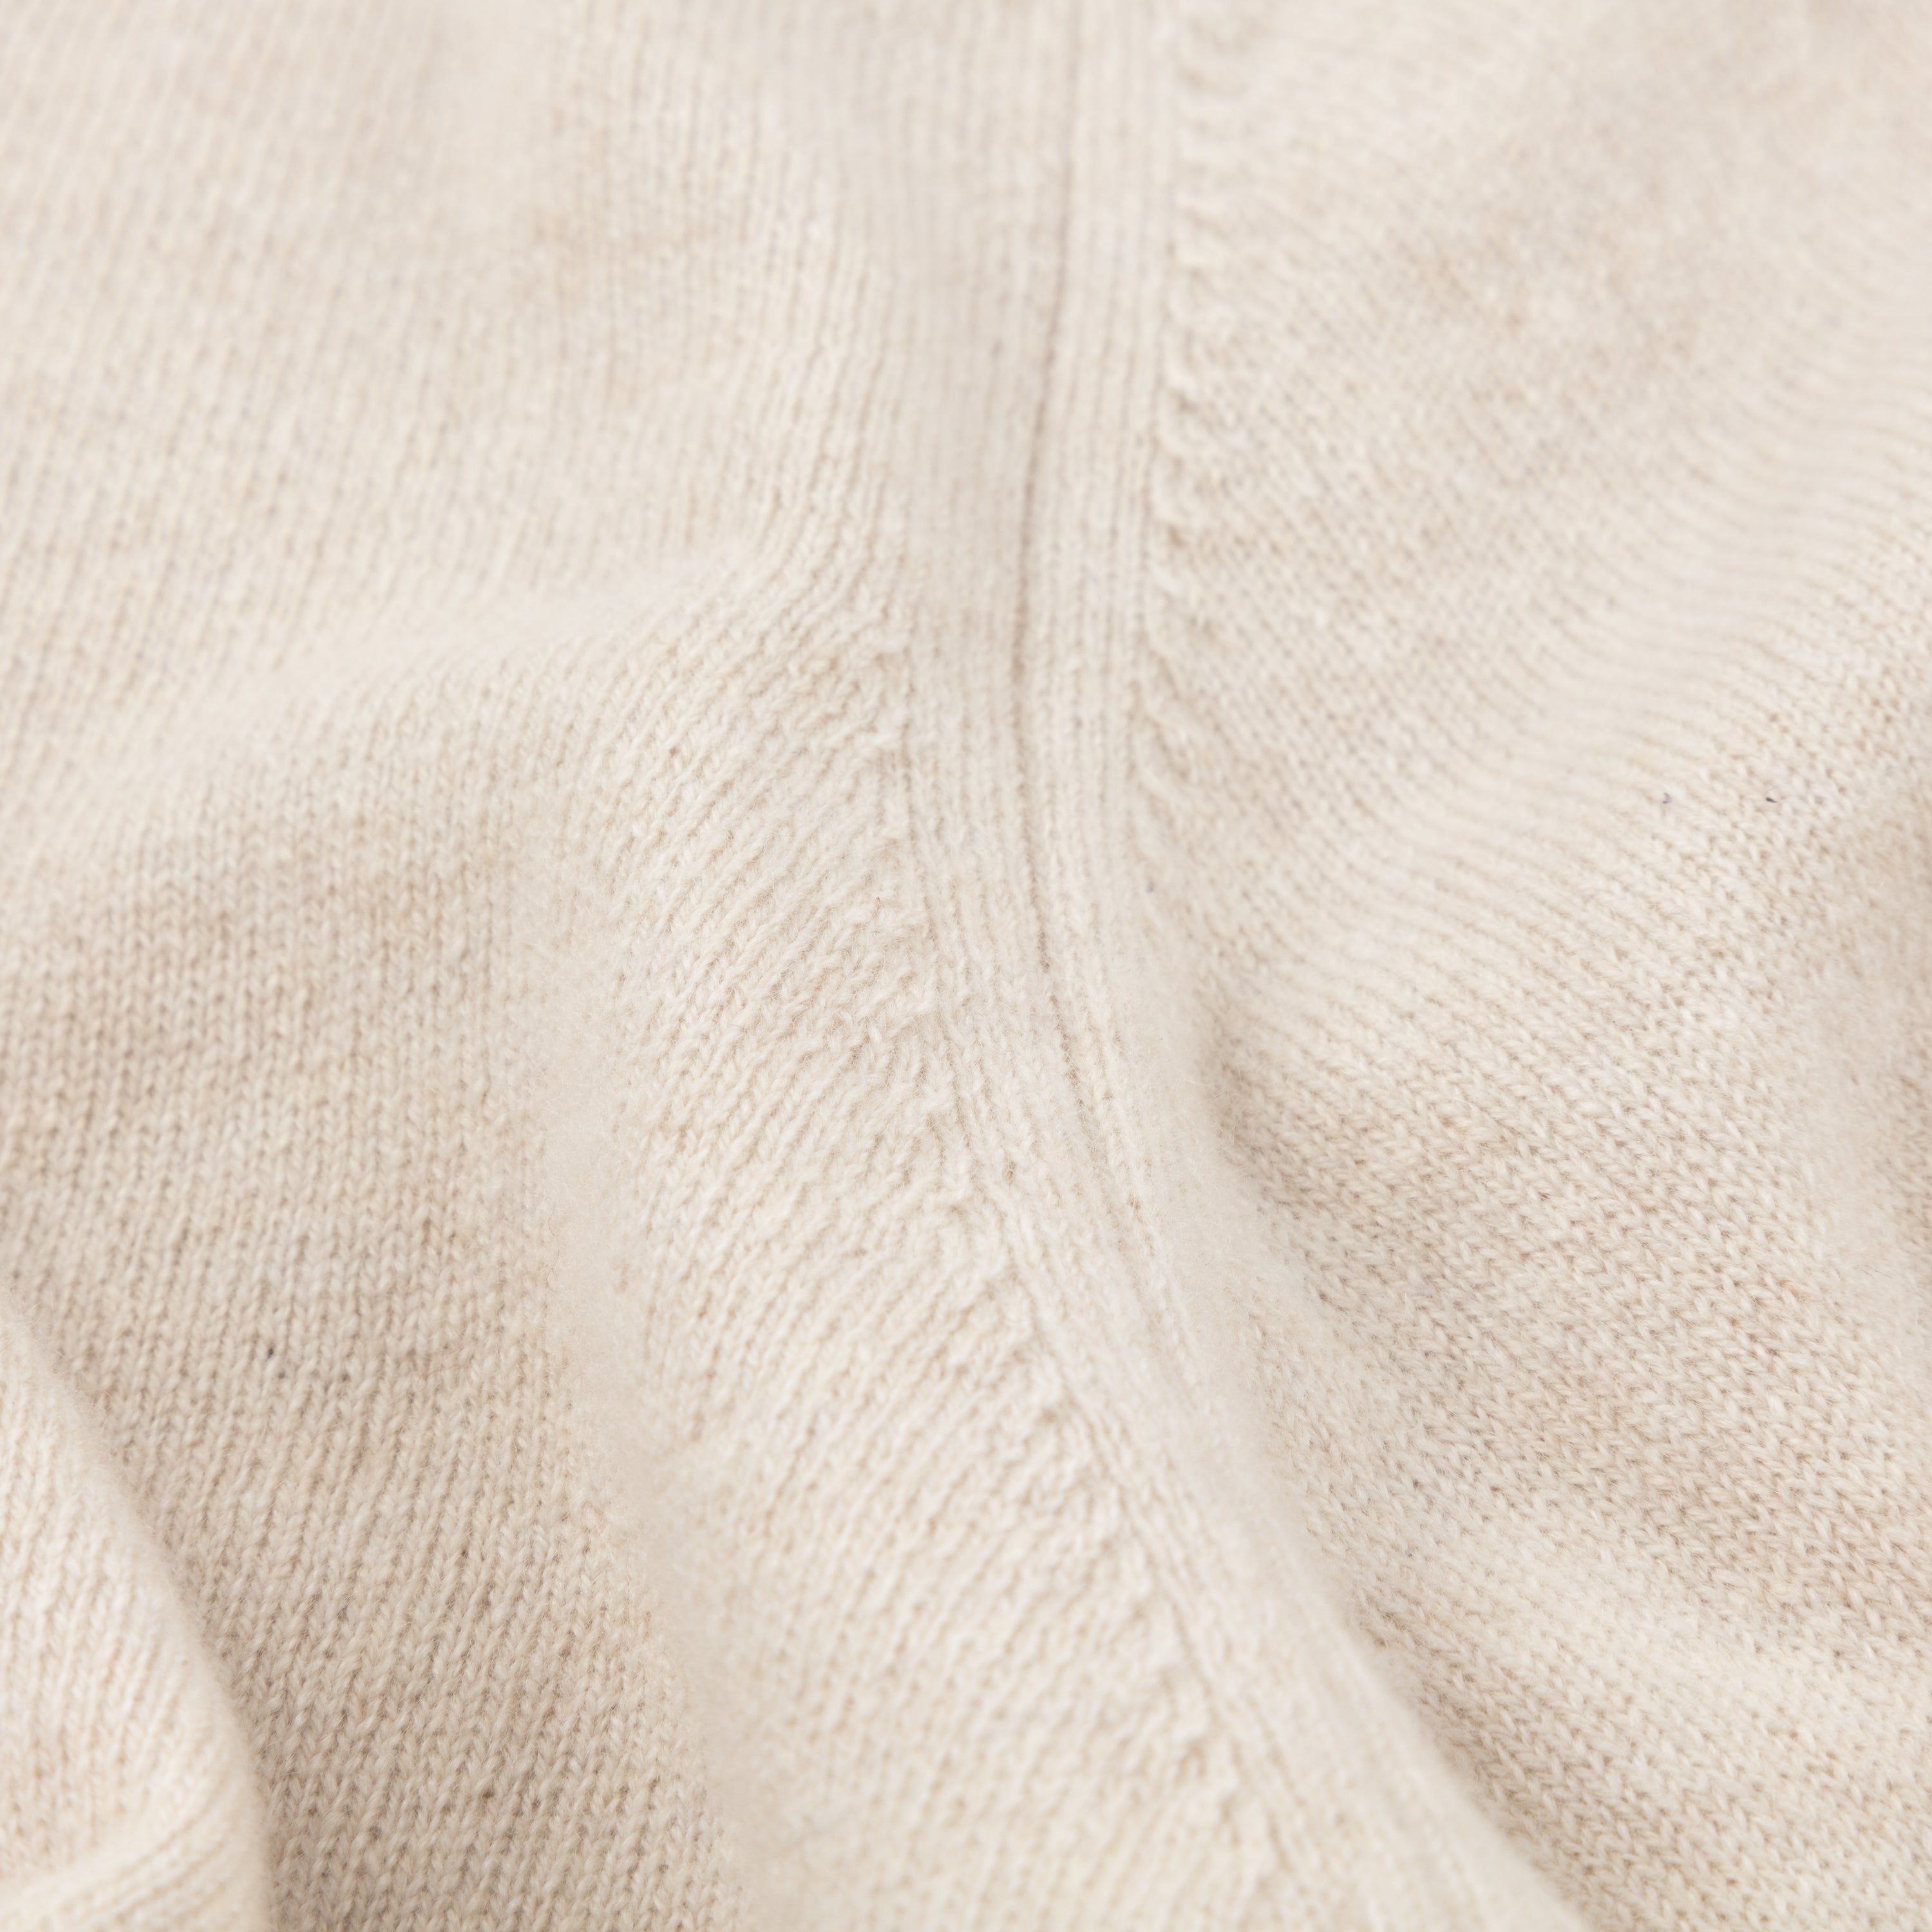 Cashmere crew neck in oatmeal